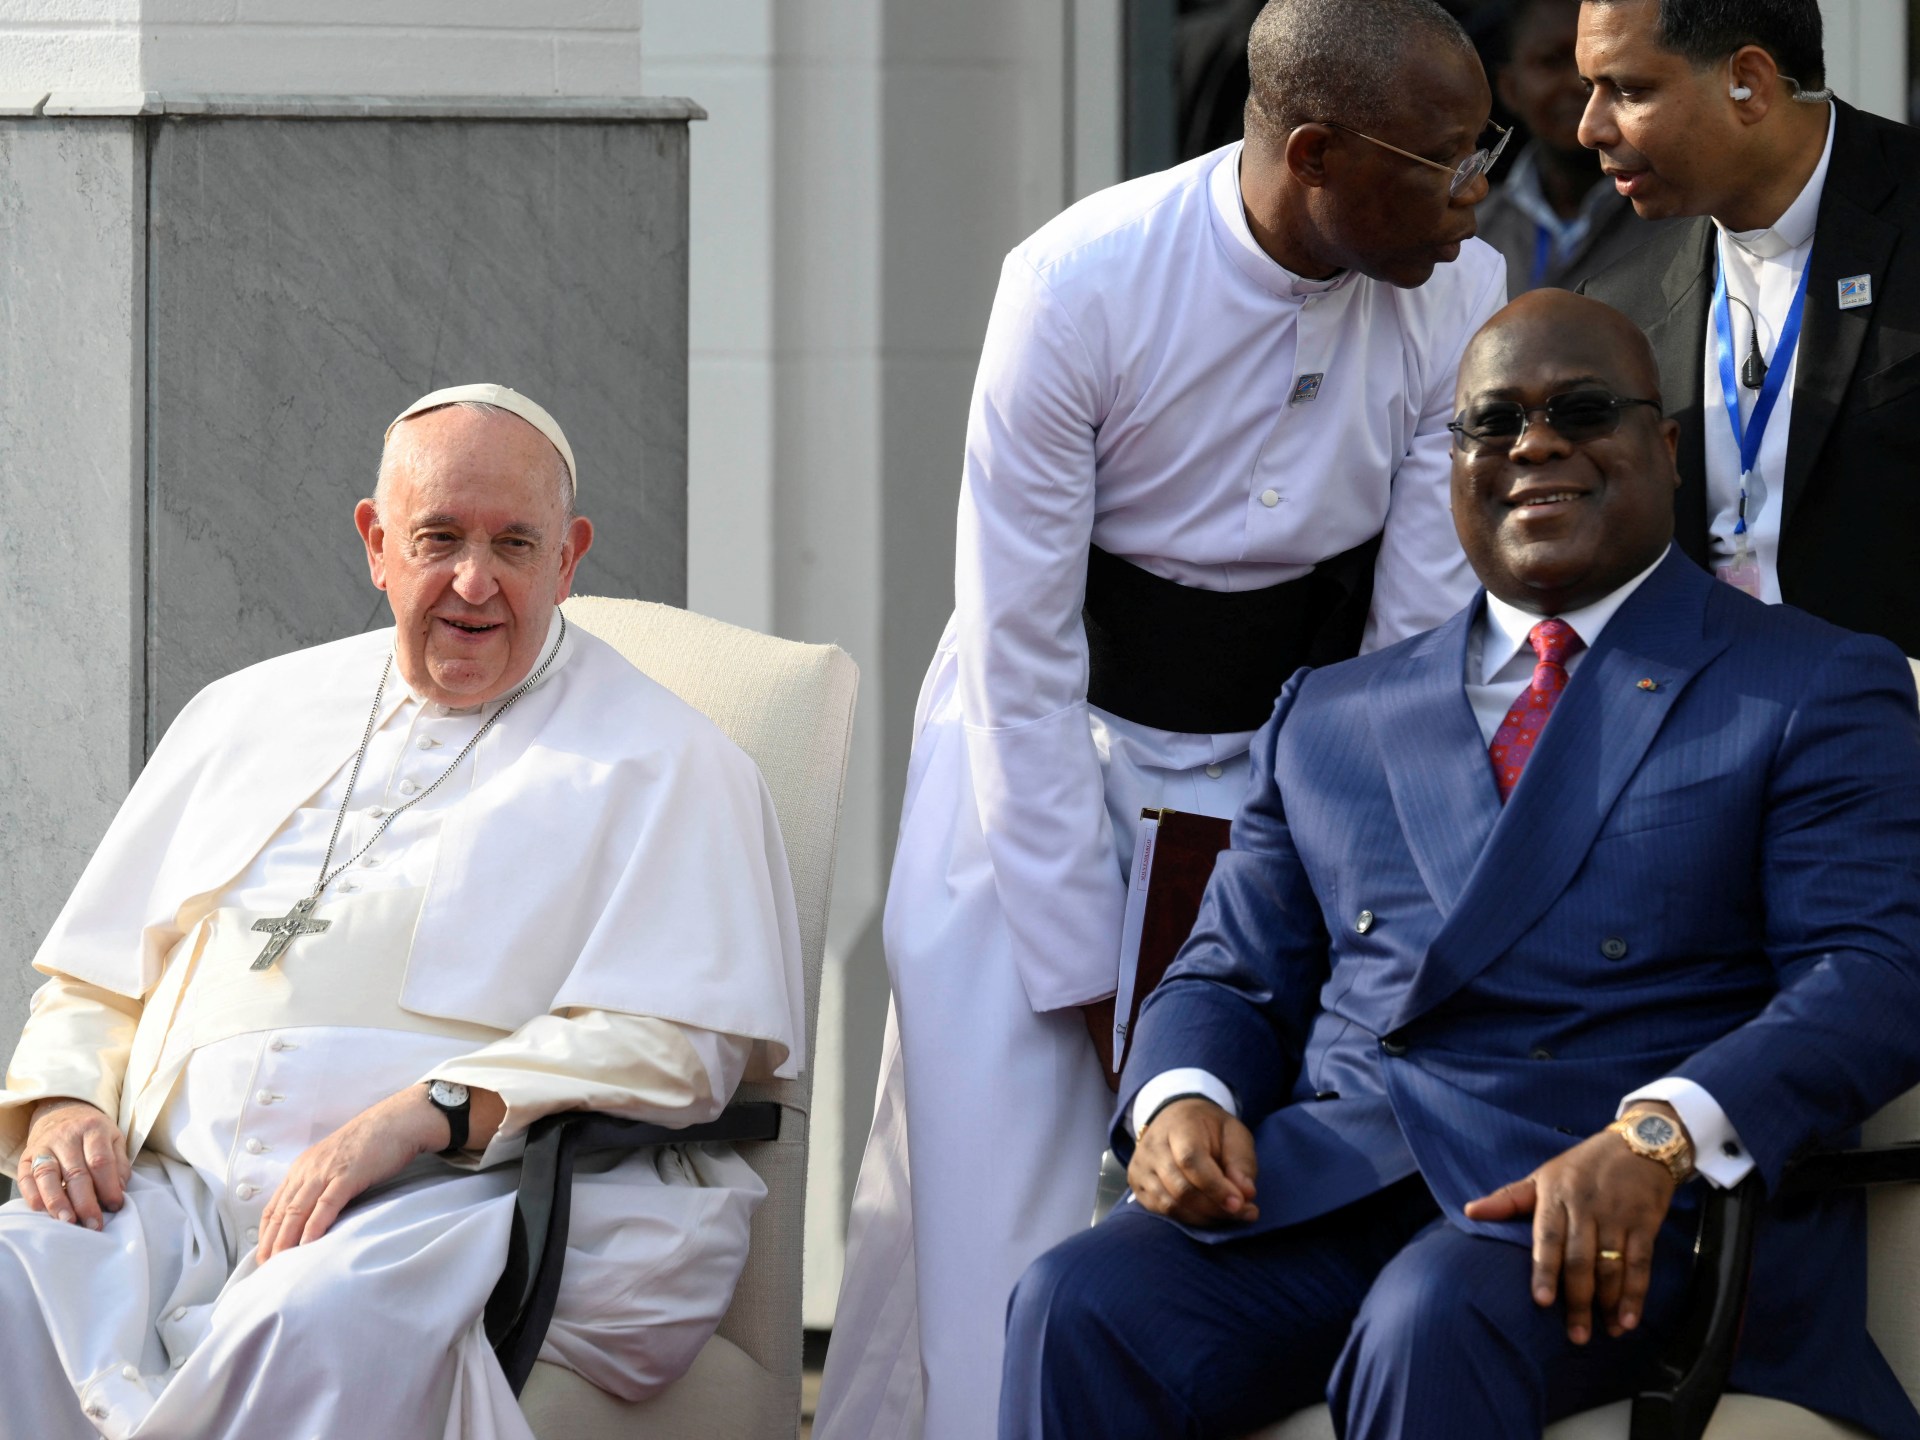 Pope slams foreign plundering of Africa as he arrives in DR Congo